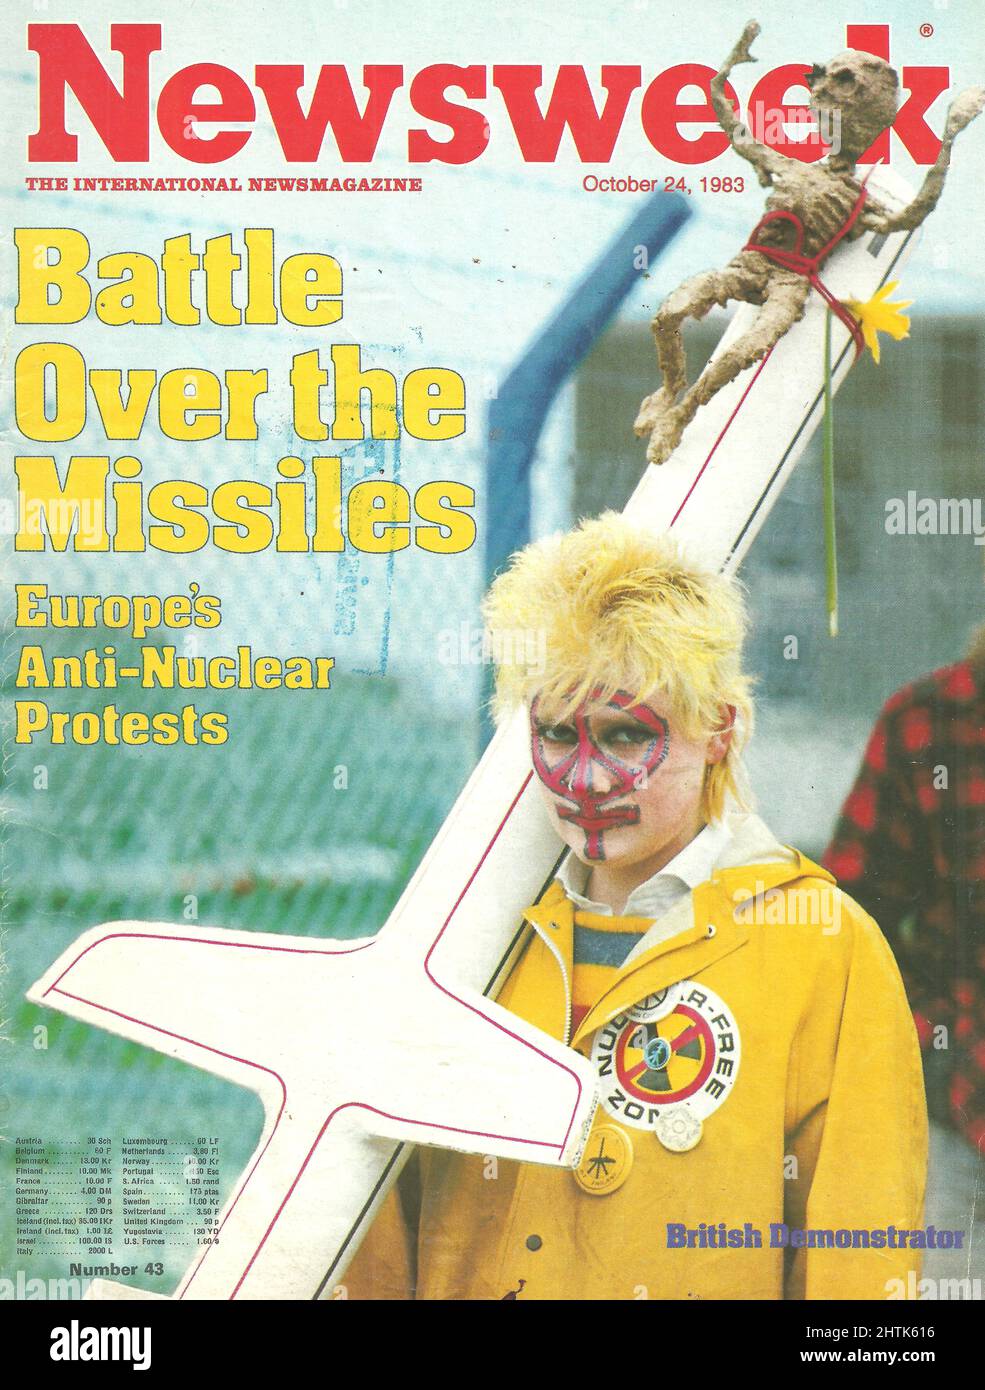 Newsweek cover October 24 1983 Battle over the missiles Europe's anti-nuclear protests British demonstator Stock Photo